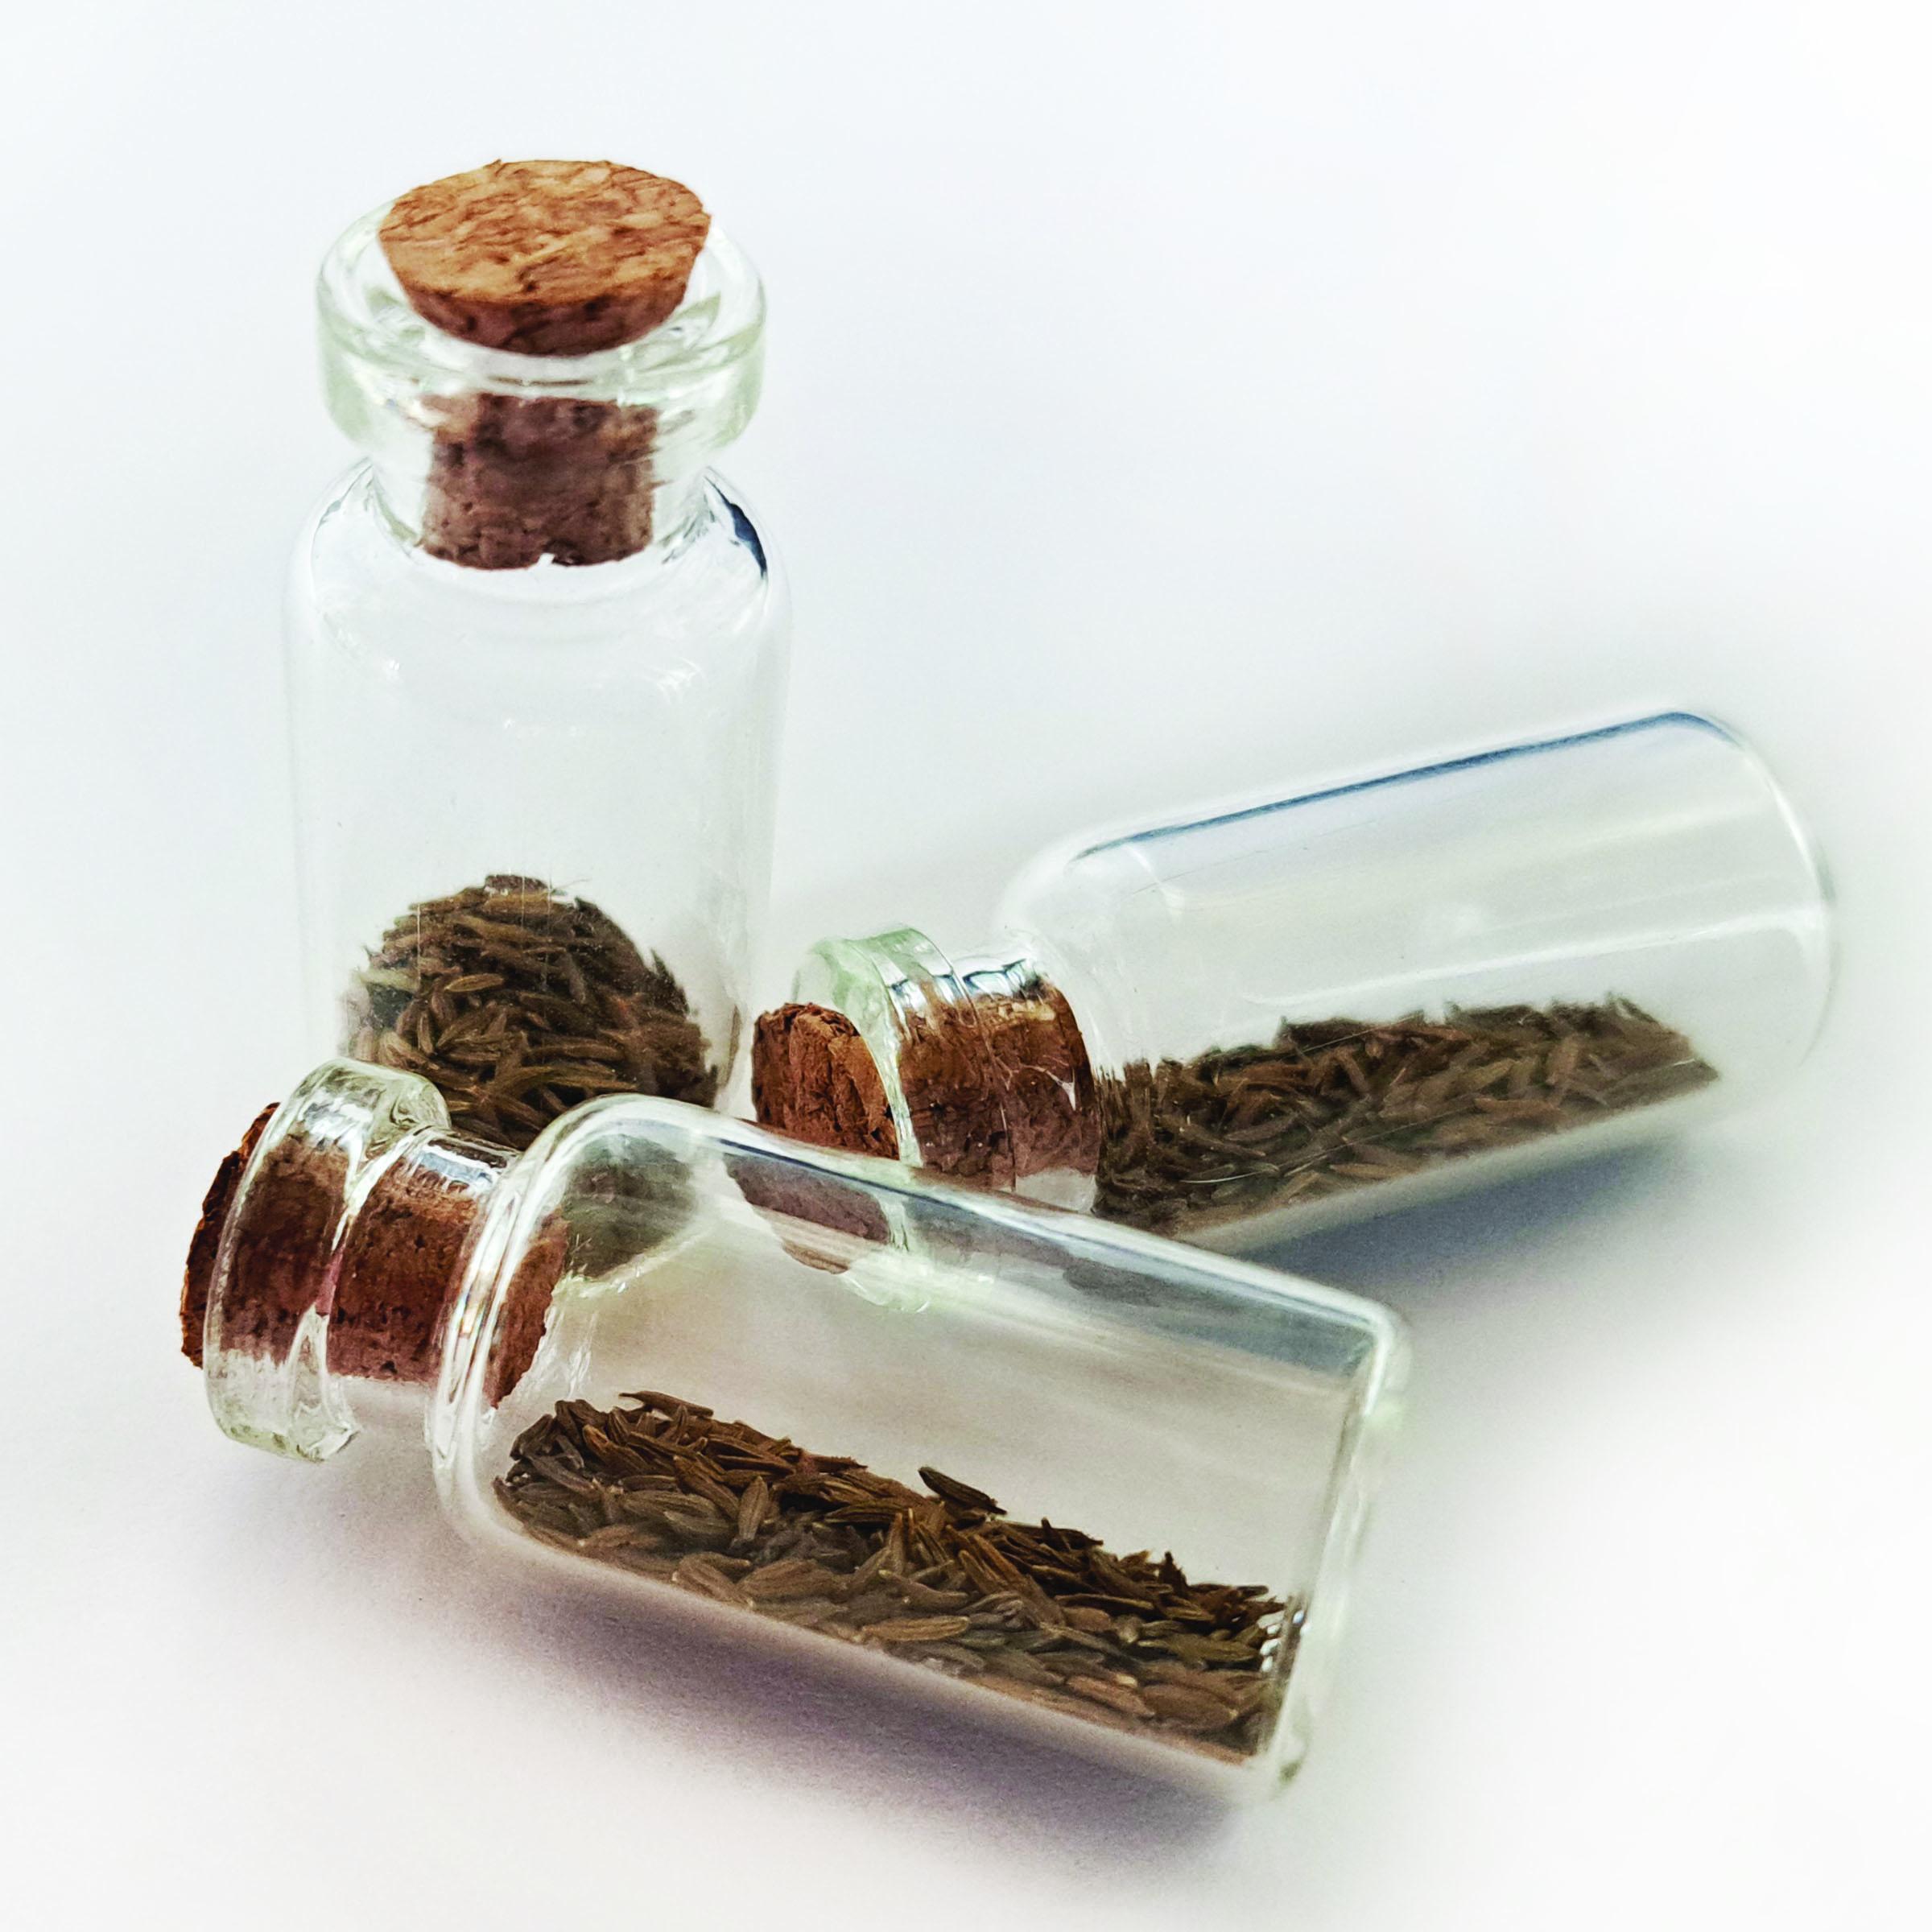 Three small clear glass jars with
natural cork tops, each filled with brown dandelion seeds.